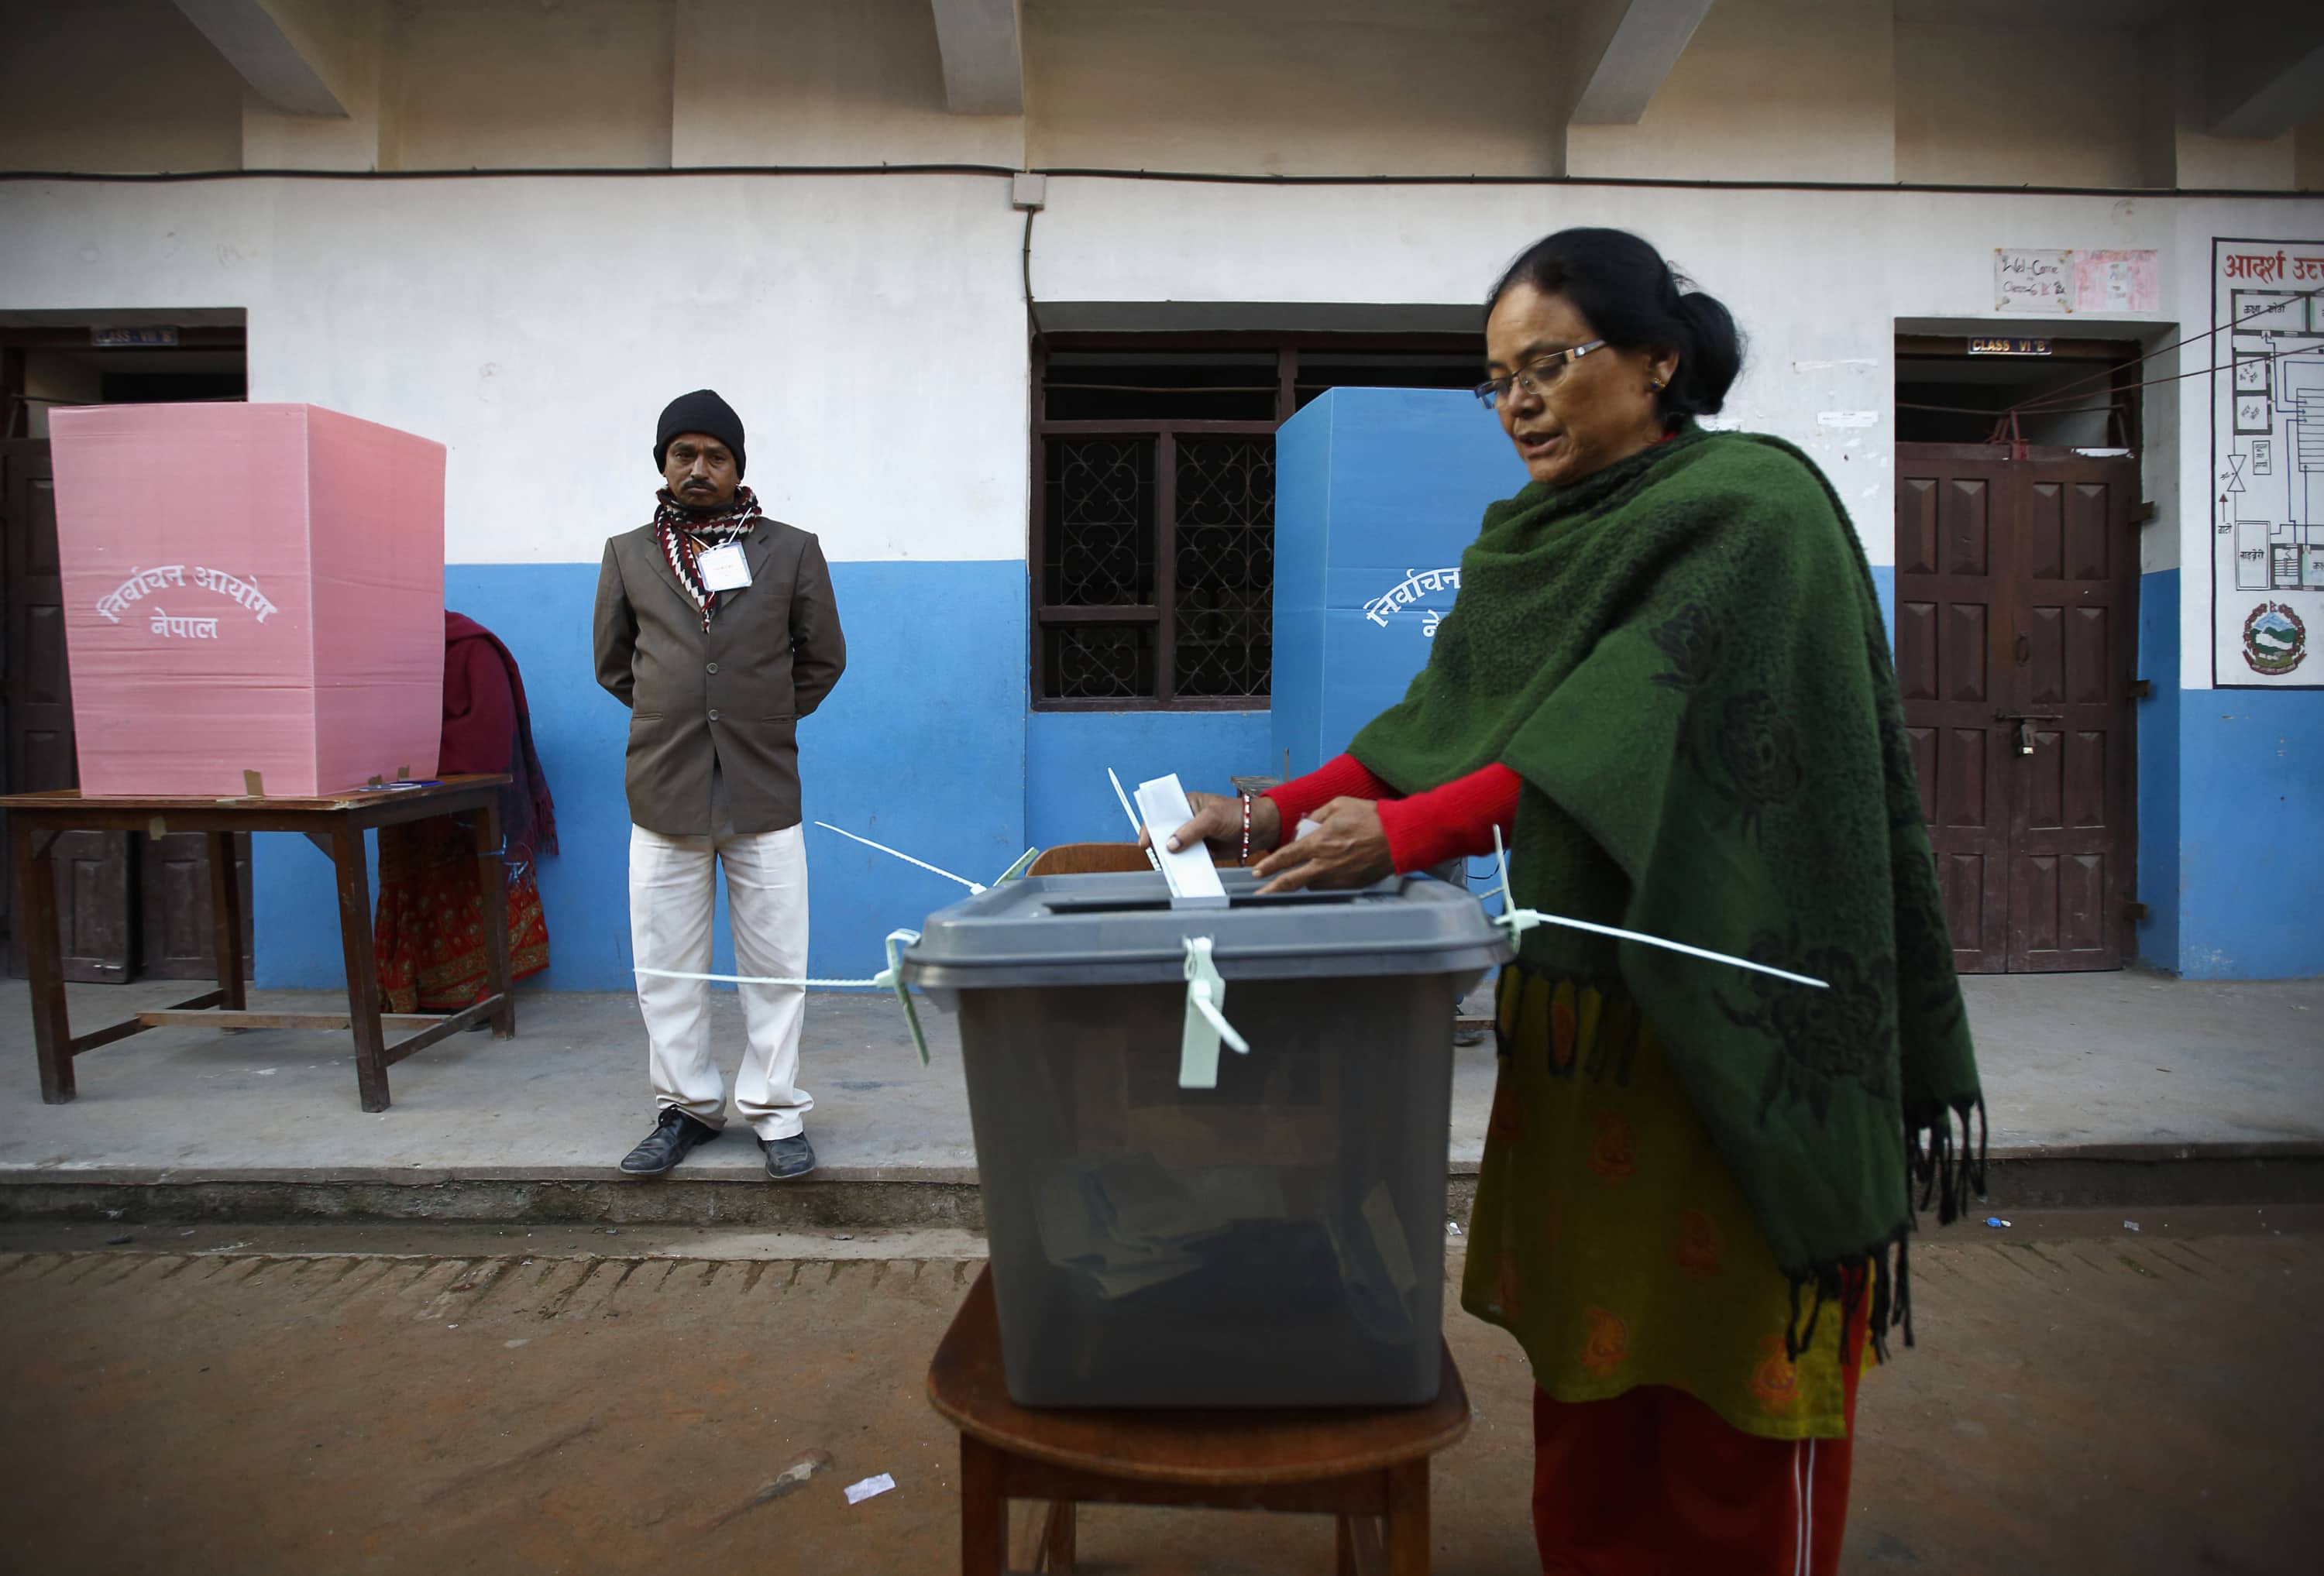 A Nepalese woman casts her vote during the Constituent Assembly Election in Bhaktapur, 19 November 2013, REUTERS/Navesh Chitrakar